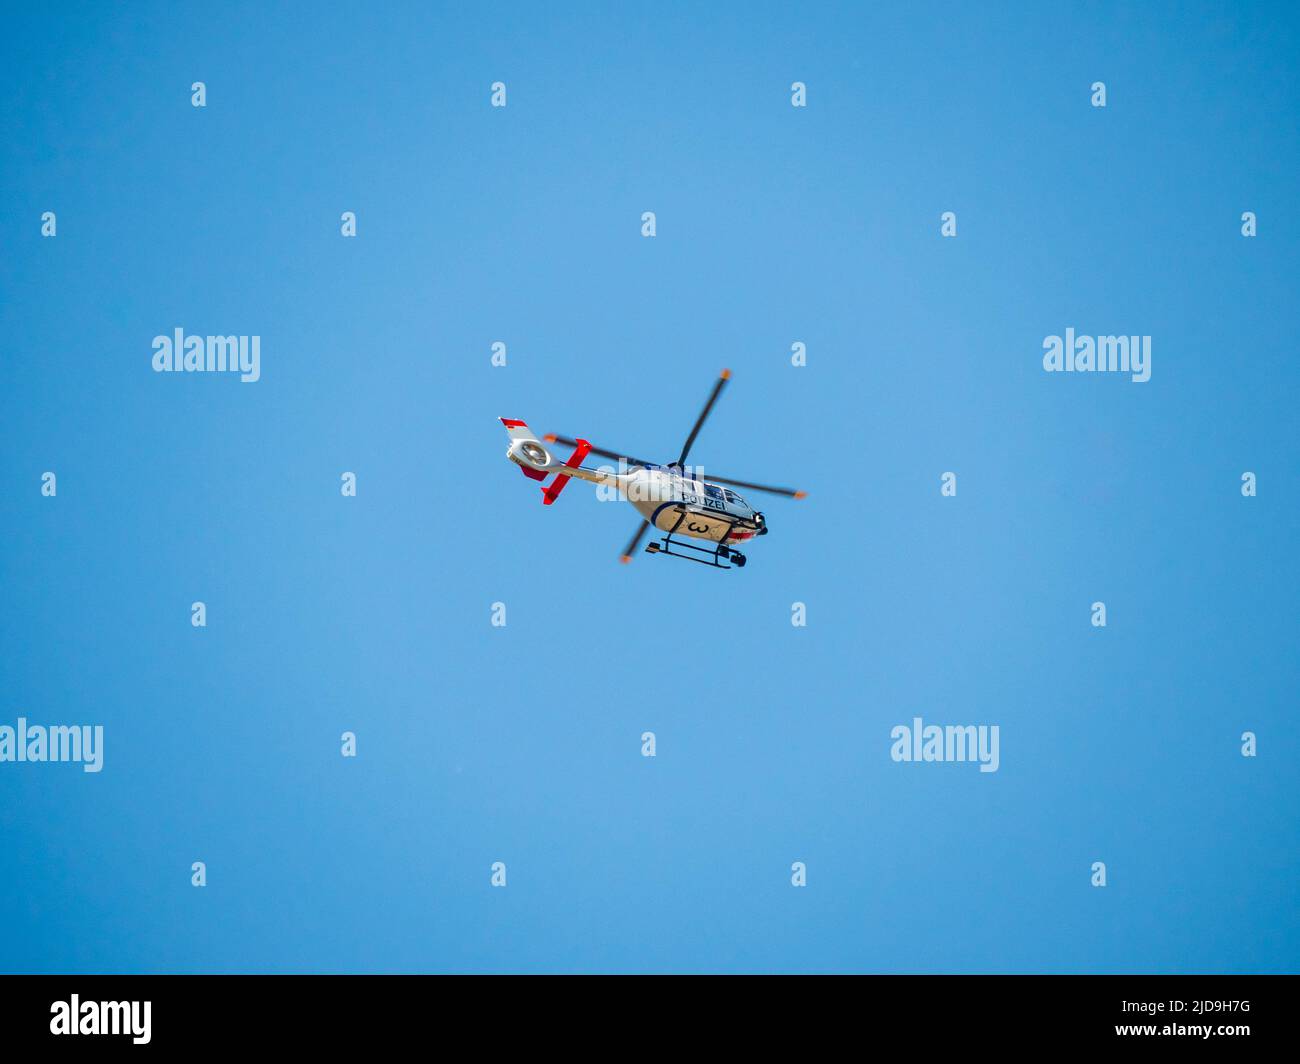 Police helicopter high up in the sky. German chopper from the police in saxony. The sky is blue and clear. People in the vehicle are observing. Stock Photo